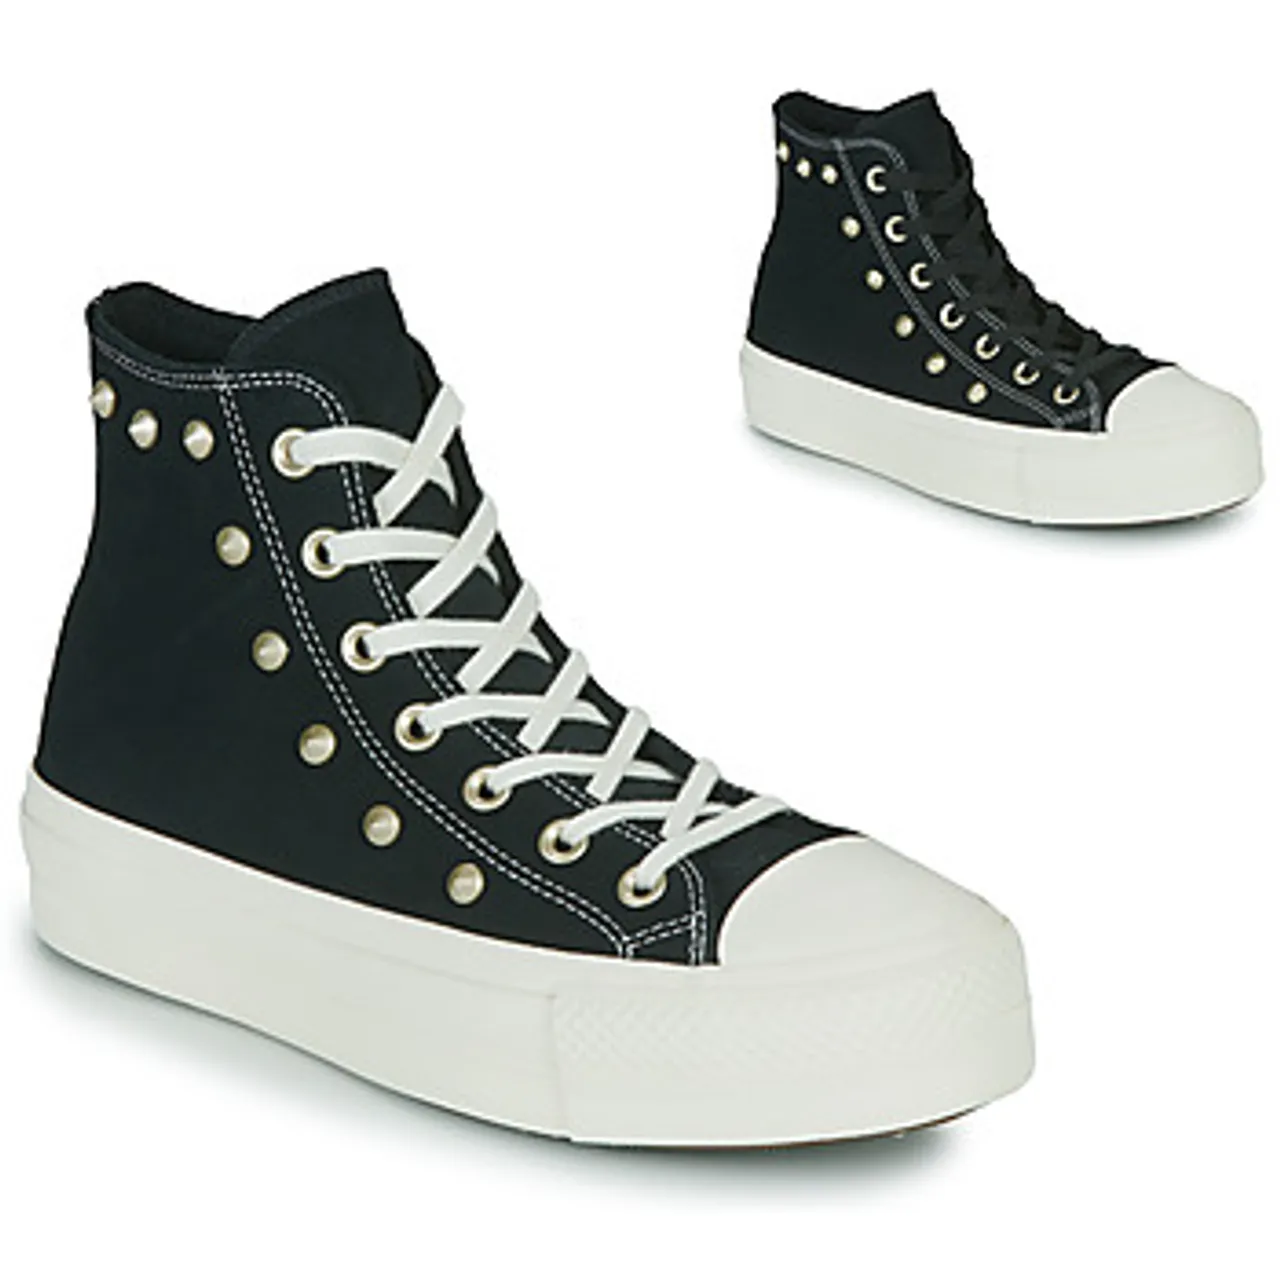 Converse  Chuck Taylor All Star Lift Glam   Punk Hi  women's Shoes (High-top Trainers) in Black